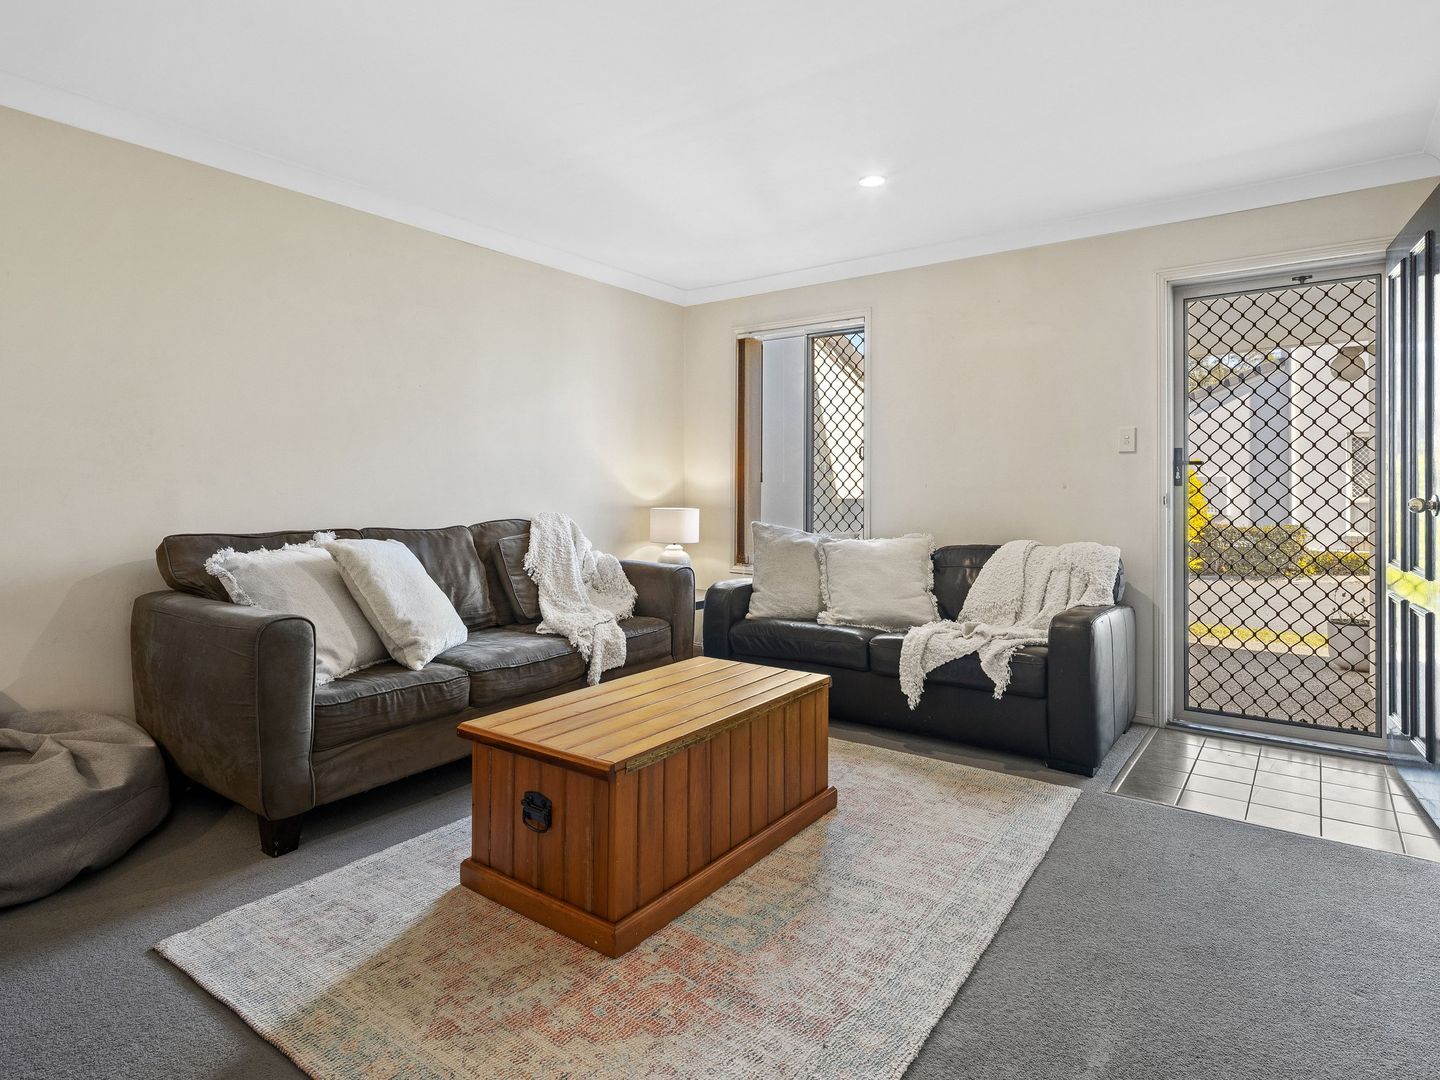 29/10 Chapman Place, Oxley QLD 4075, Image 1